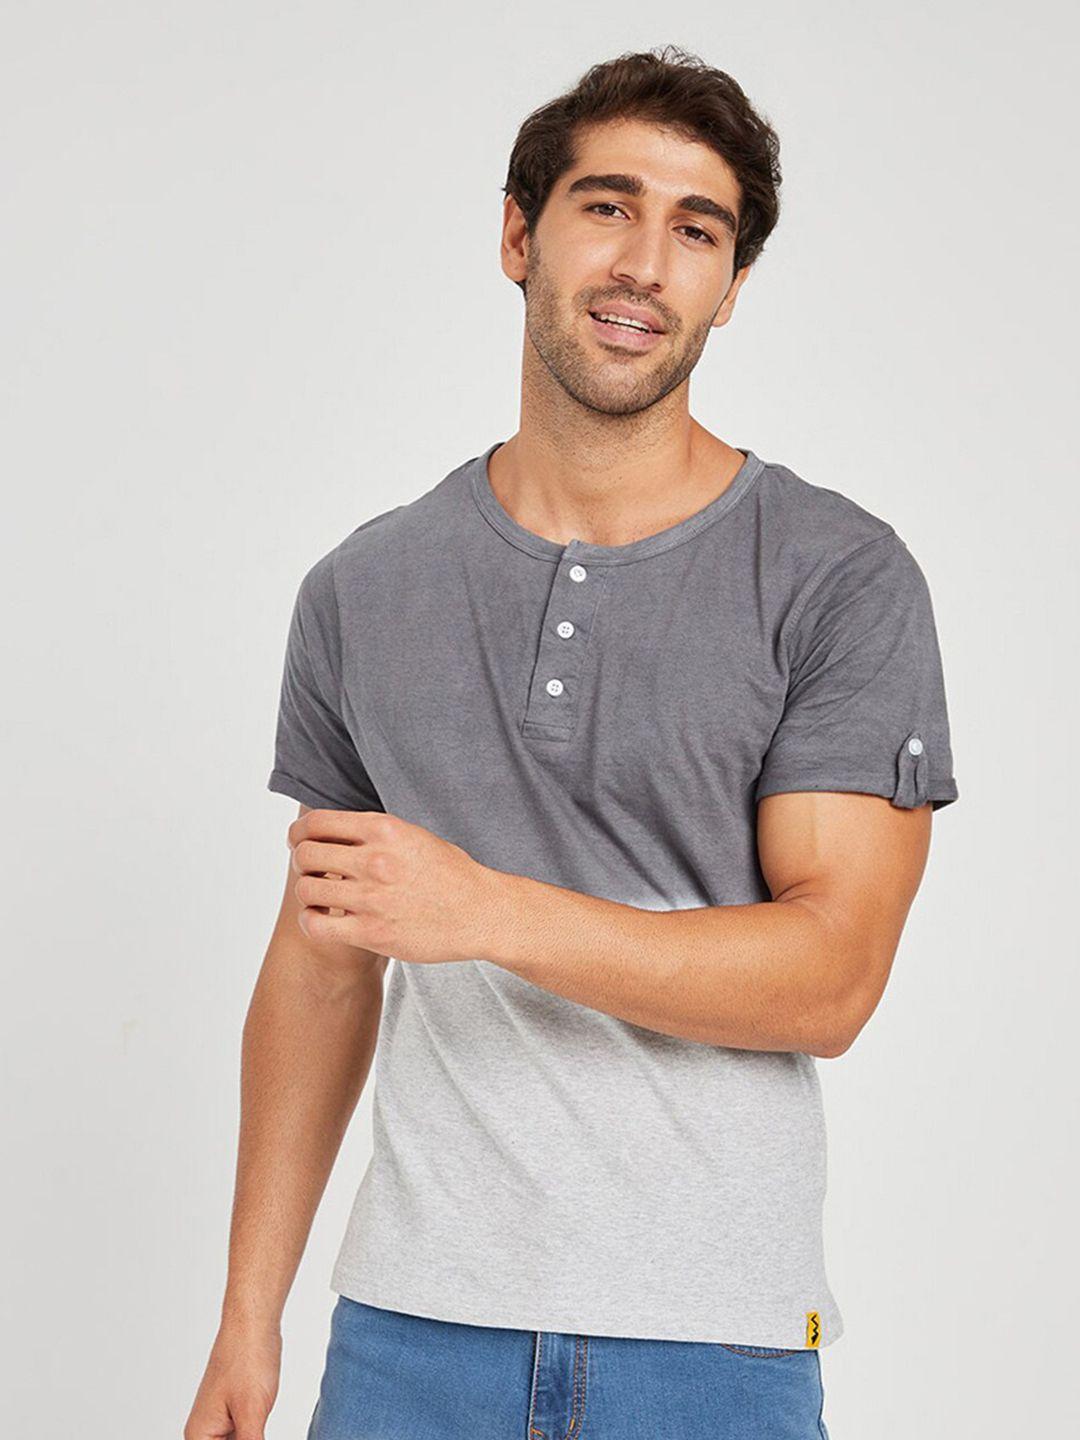 campus sutra charcoal & grey tie & dye henley neck cotton t-shirt